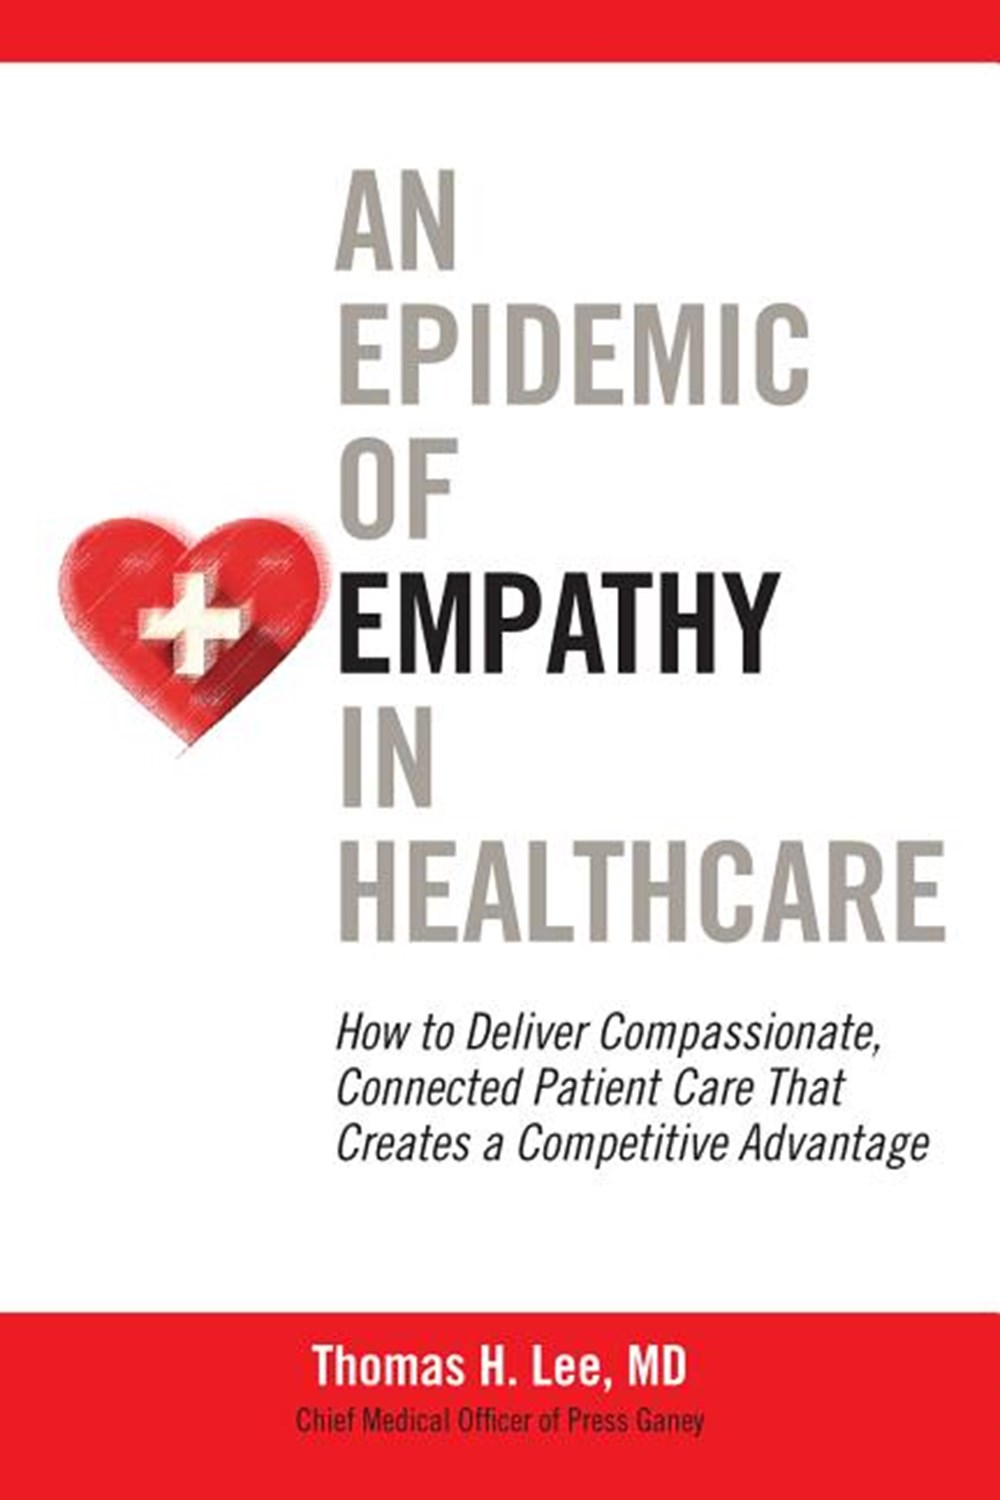 Epidemic of Empathy in Healthcare: How to Deliver Compassionate, Connected Patient Care That Creates